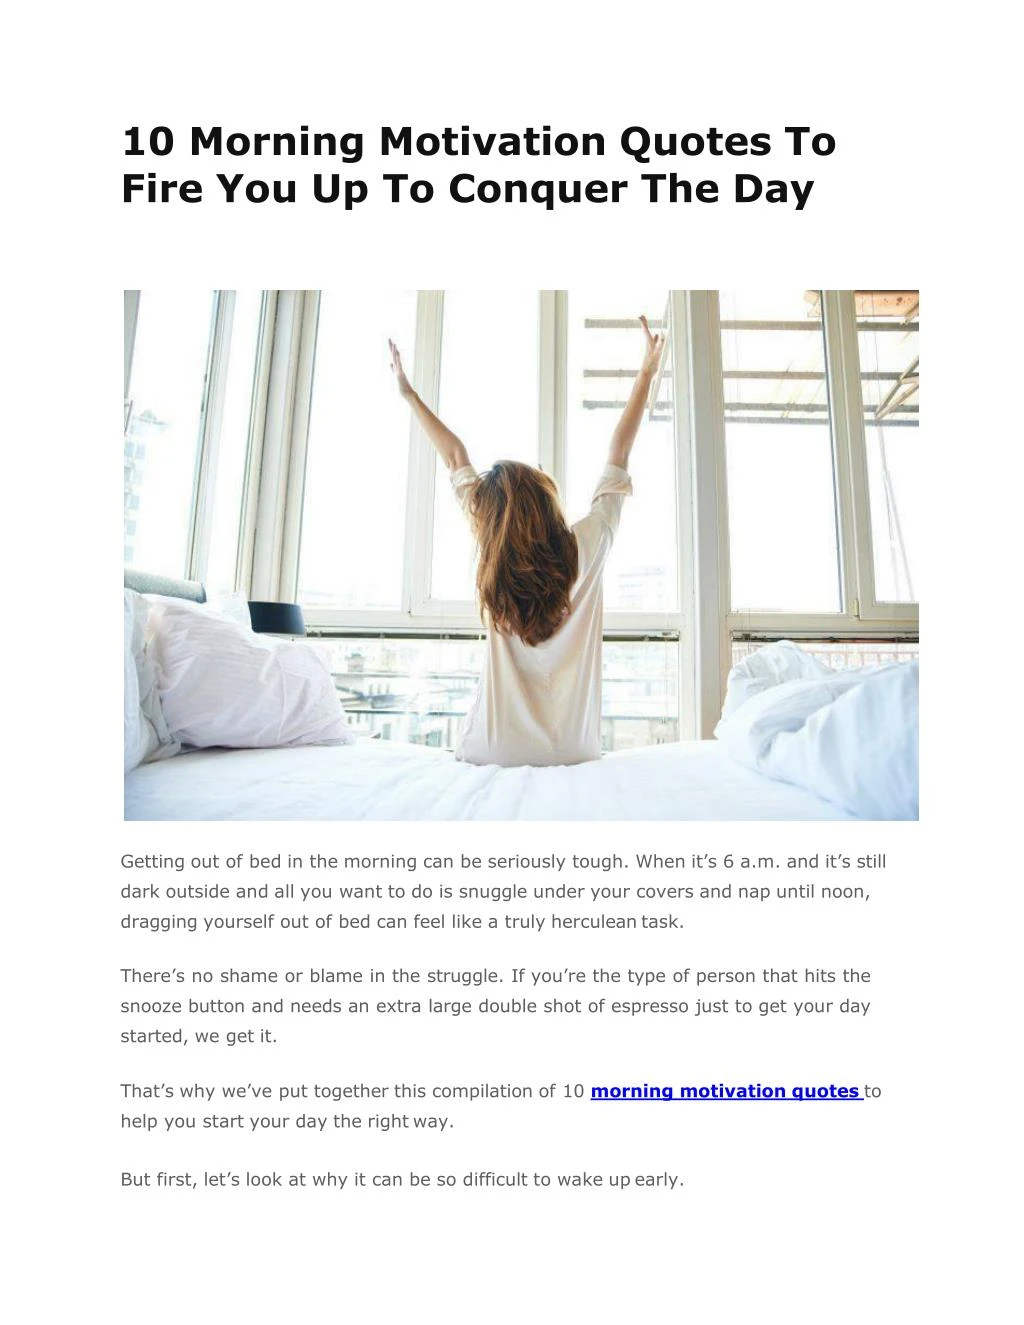 10 morning motivation quotes to fire you up to conquer the day